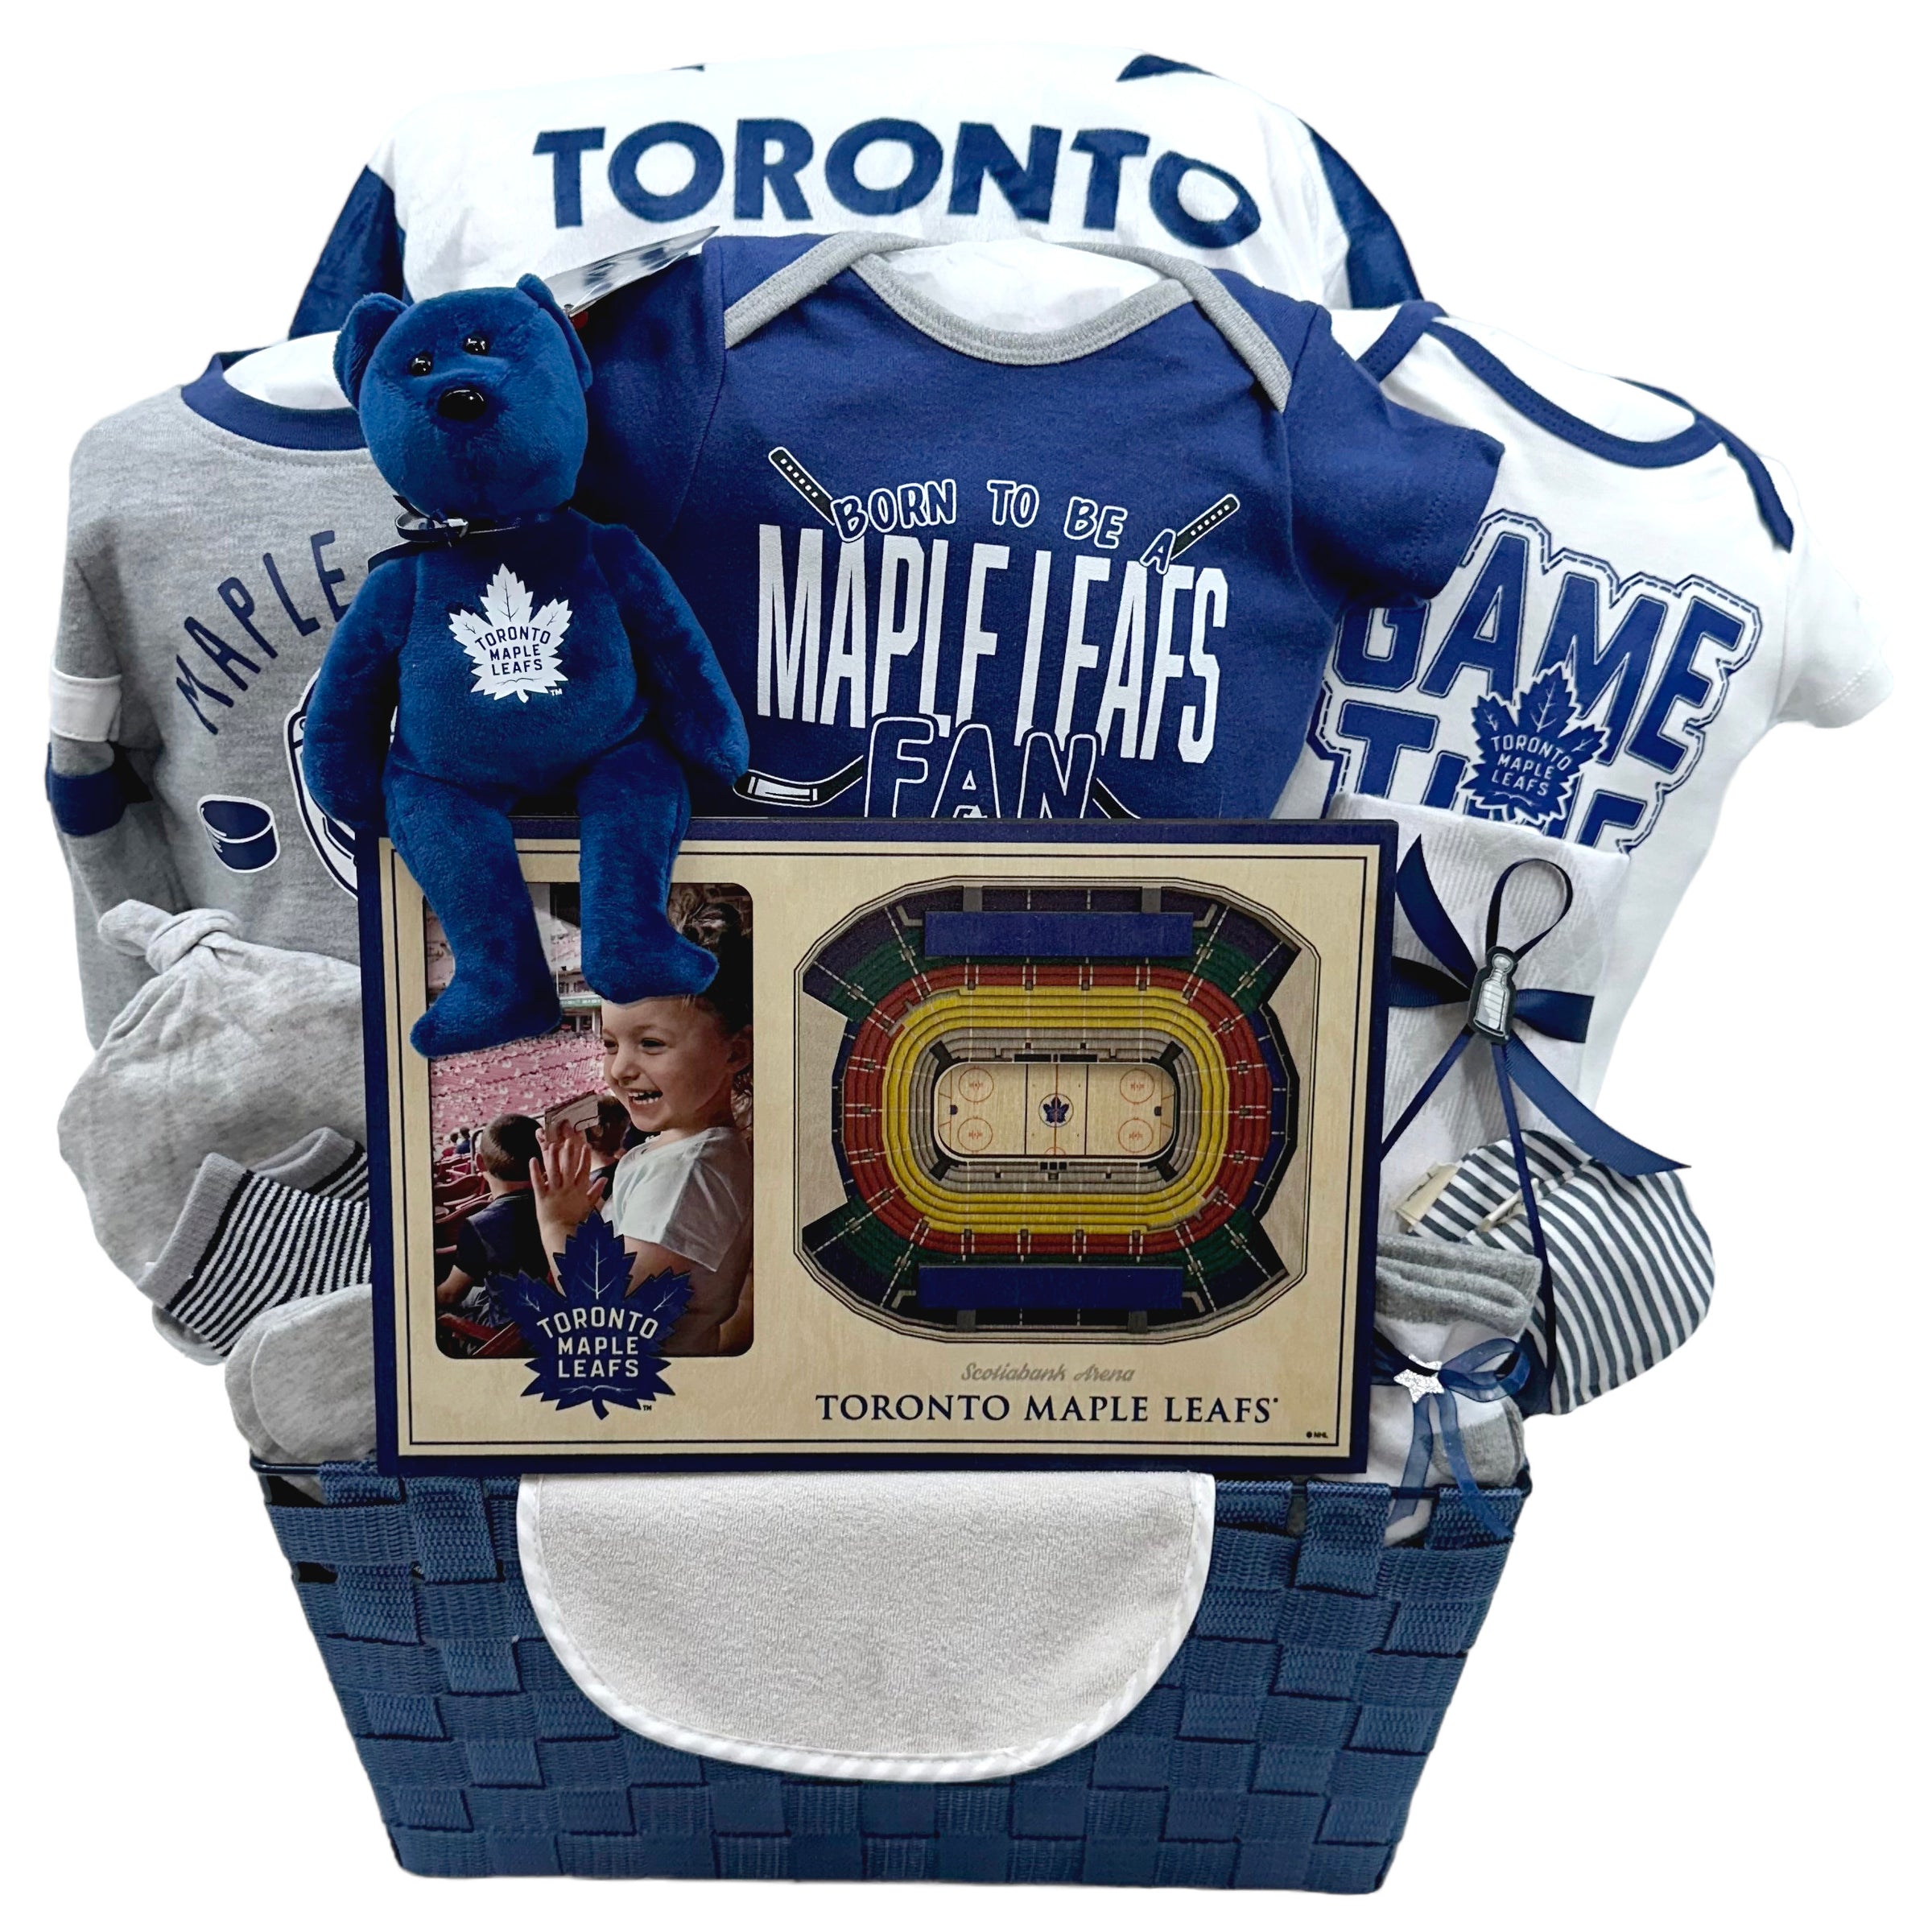 The perfect holiday gifts for the Toronto Maple Leafs fan